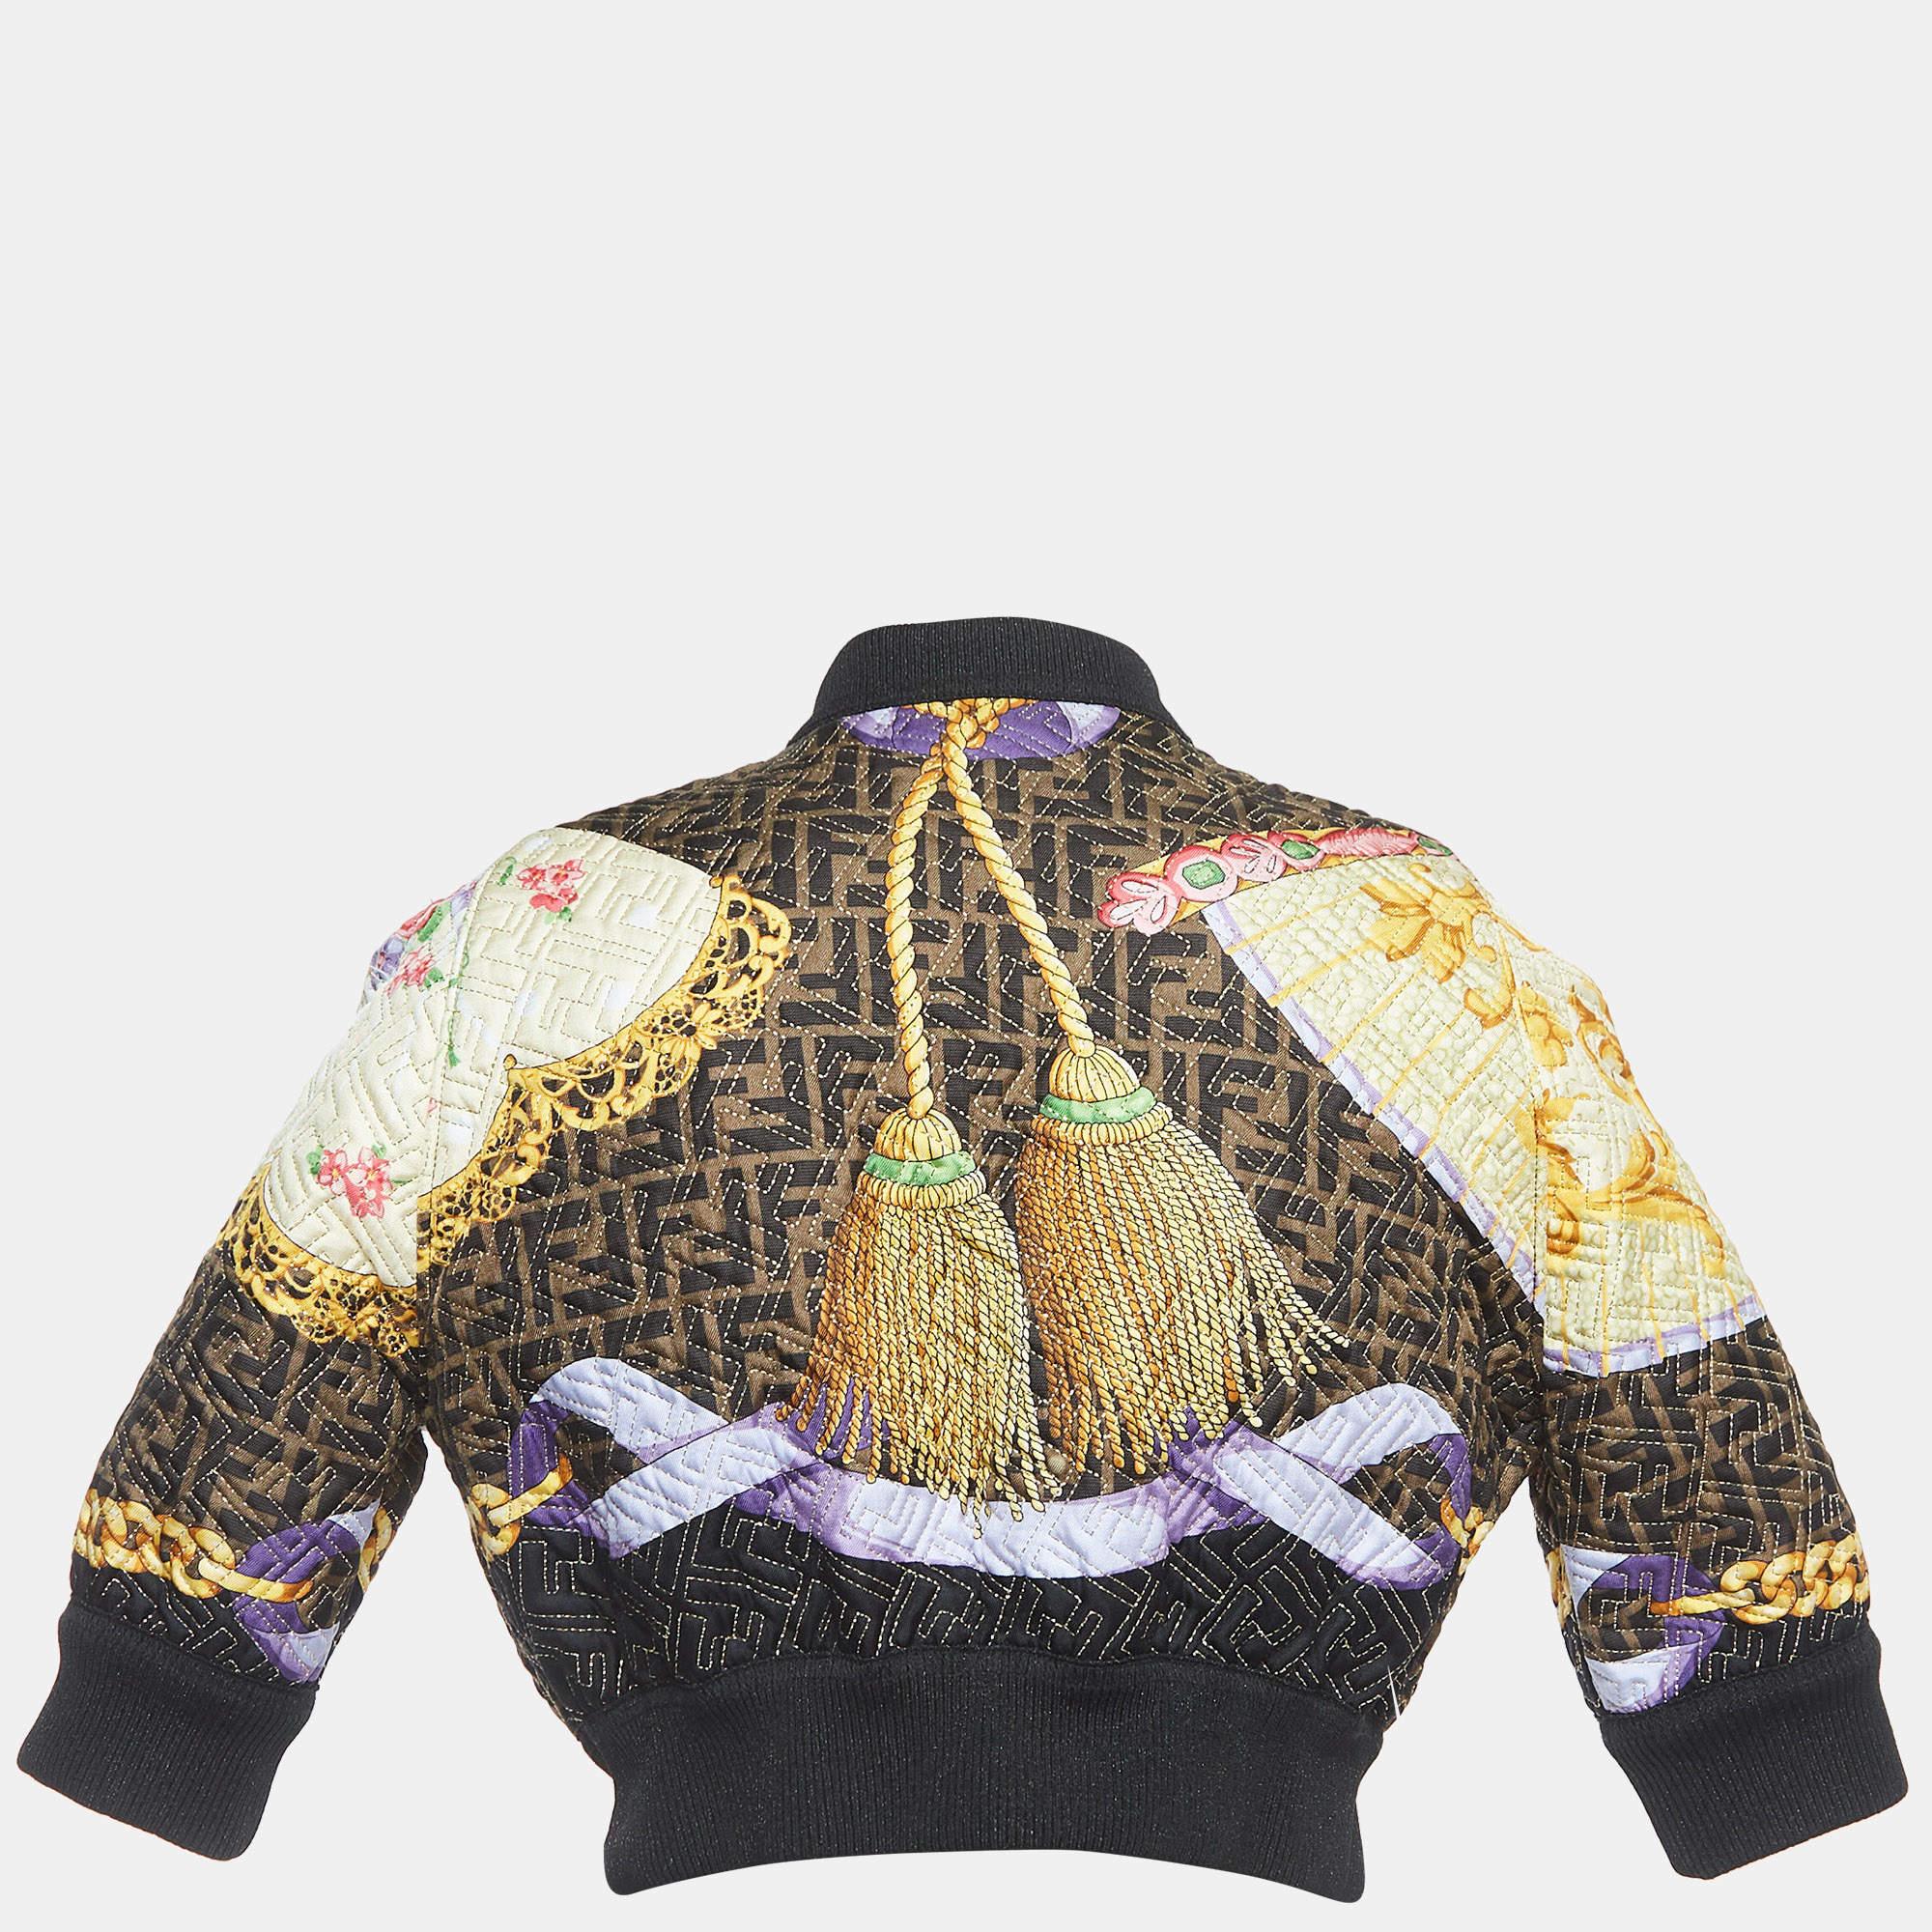 This Fendi x Versace jacket is a prize you will want to keep even if you have worn it countless times. It is carefully tailored and detailed to be a statement piece.

Includes: Hanger